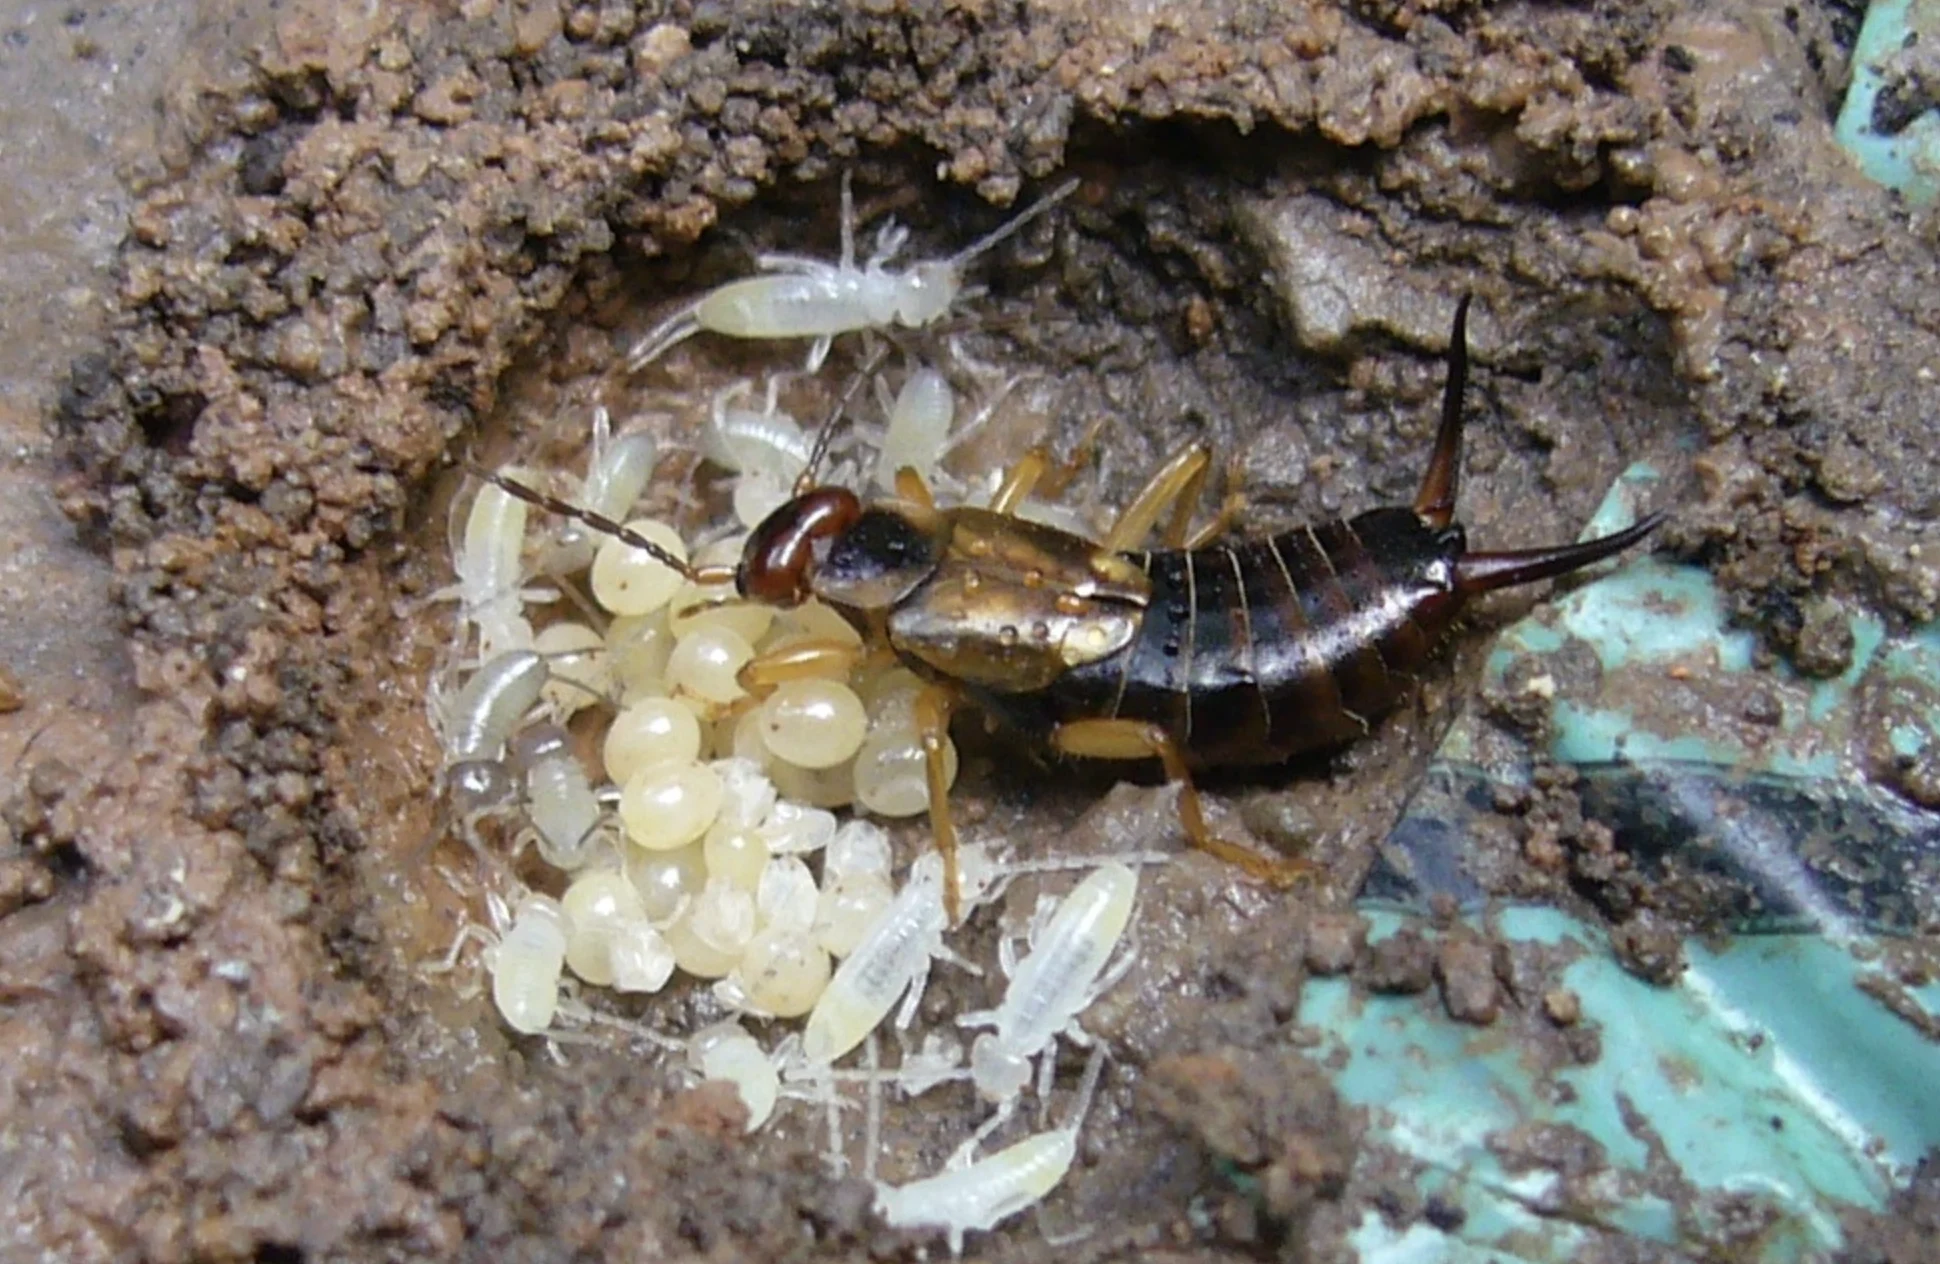 Earwig eggs are about to hatch, do this to keep them away